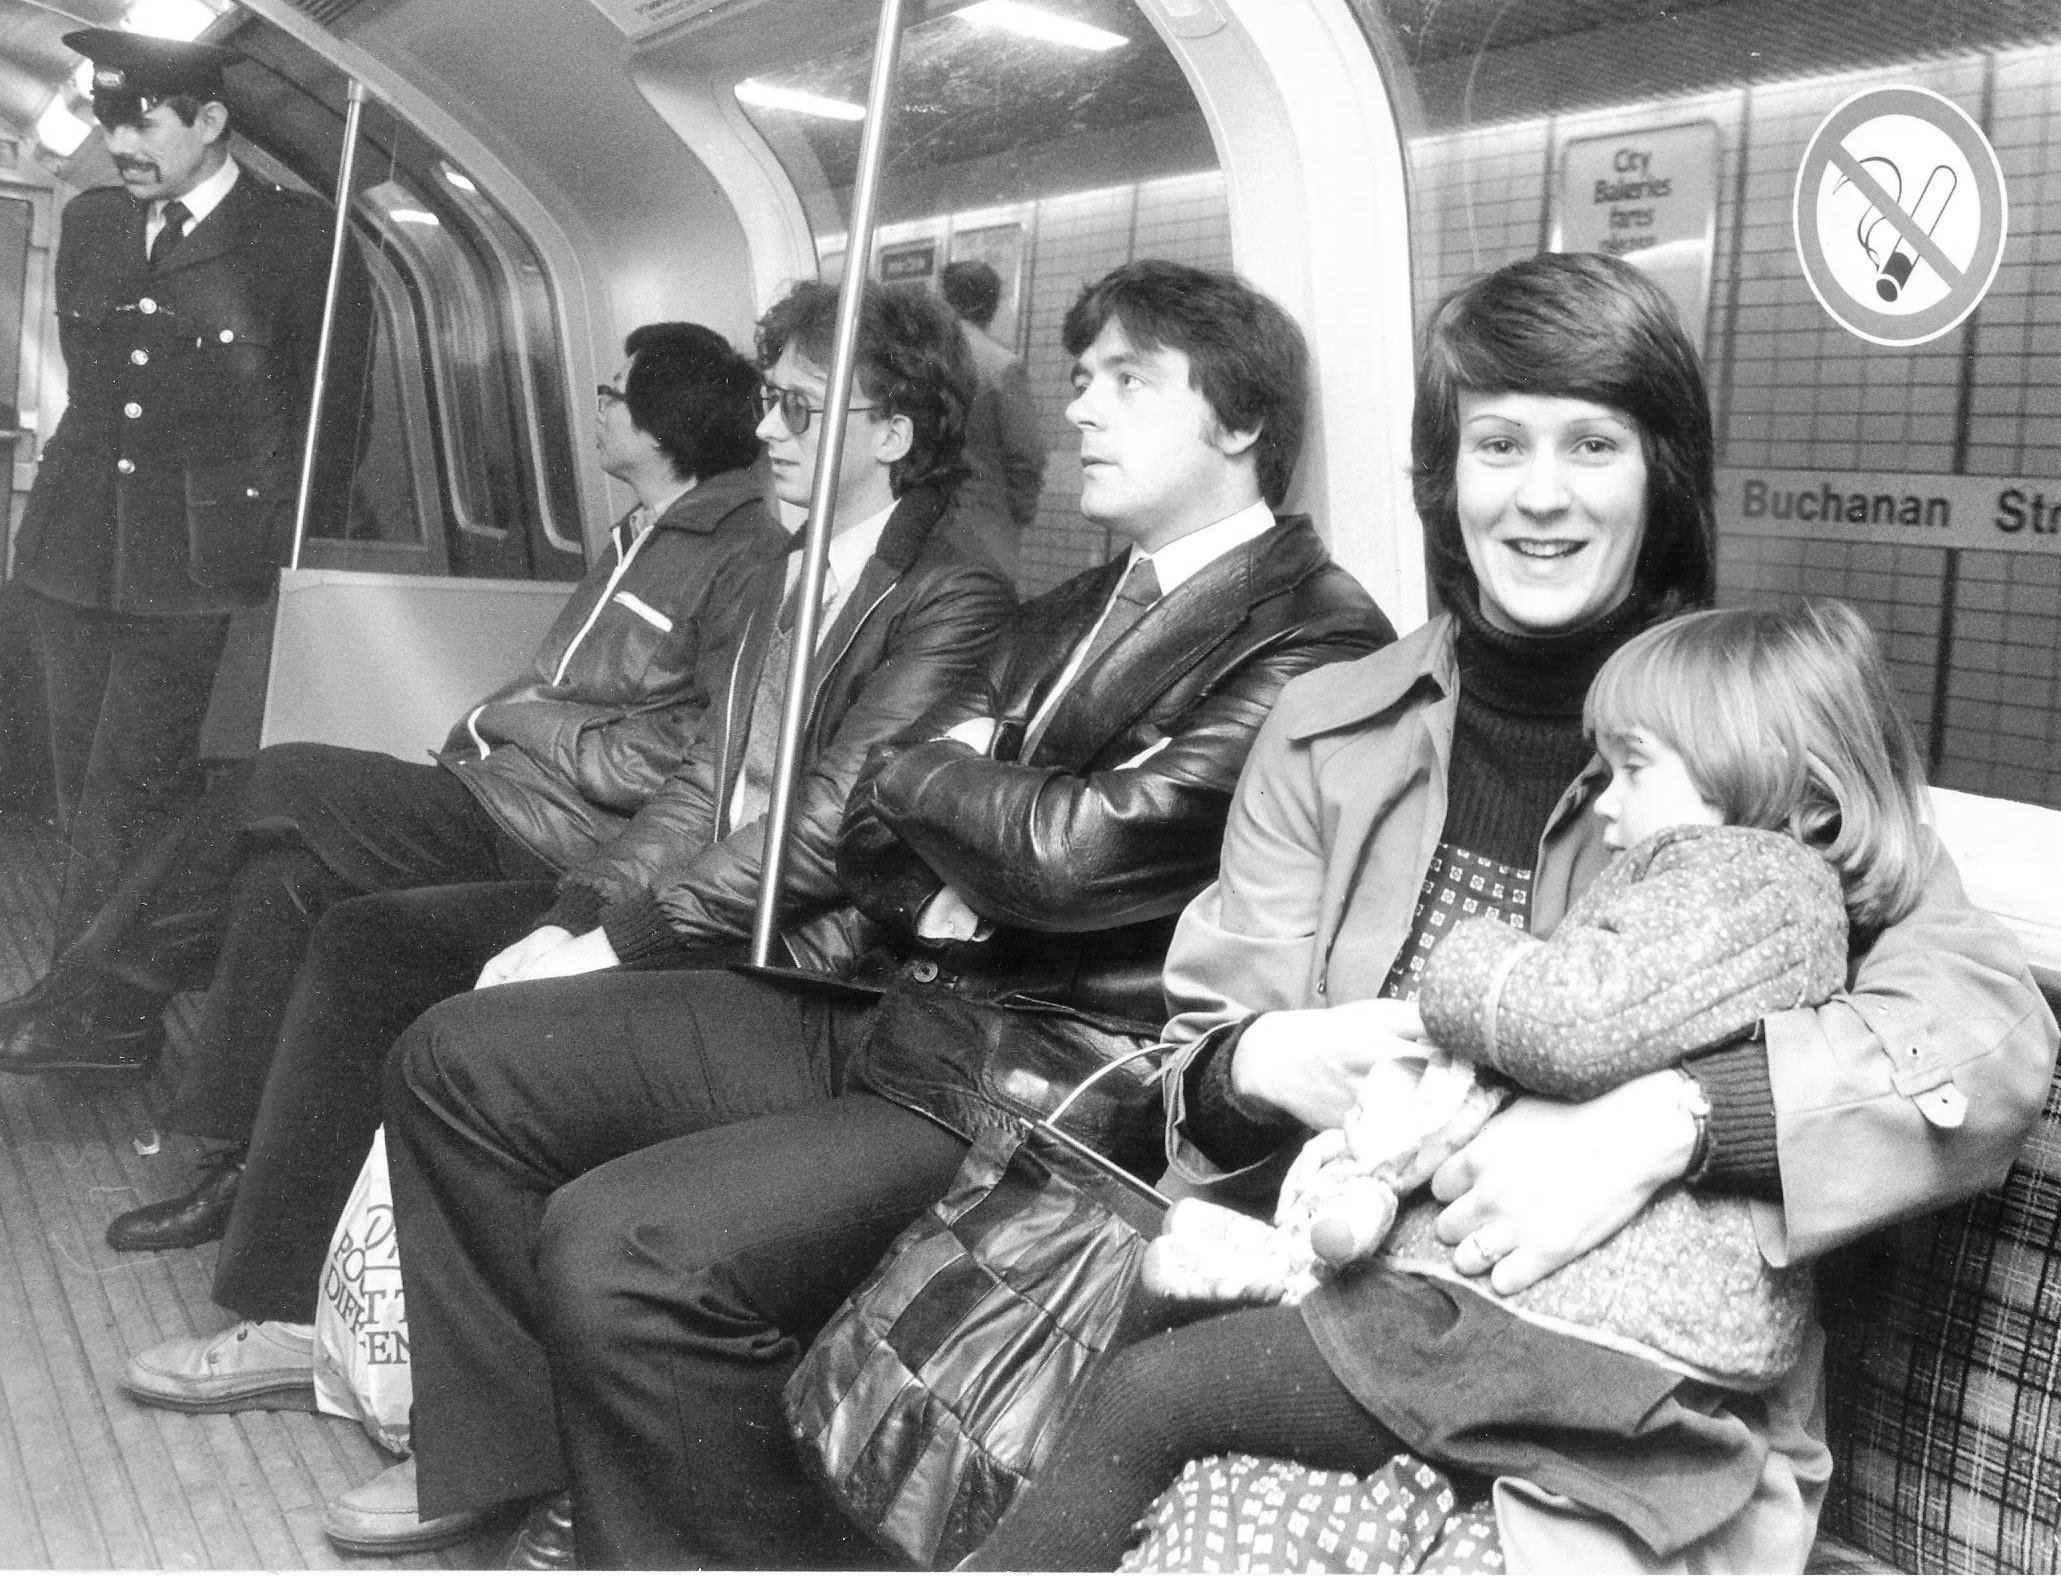 Valerie Thompson, Glasgow Subways 10 millionth visitor, pictured in 1981. Pic: Herald and Times